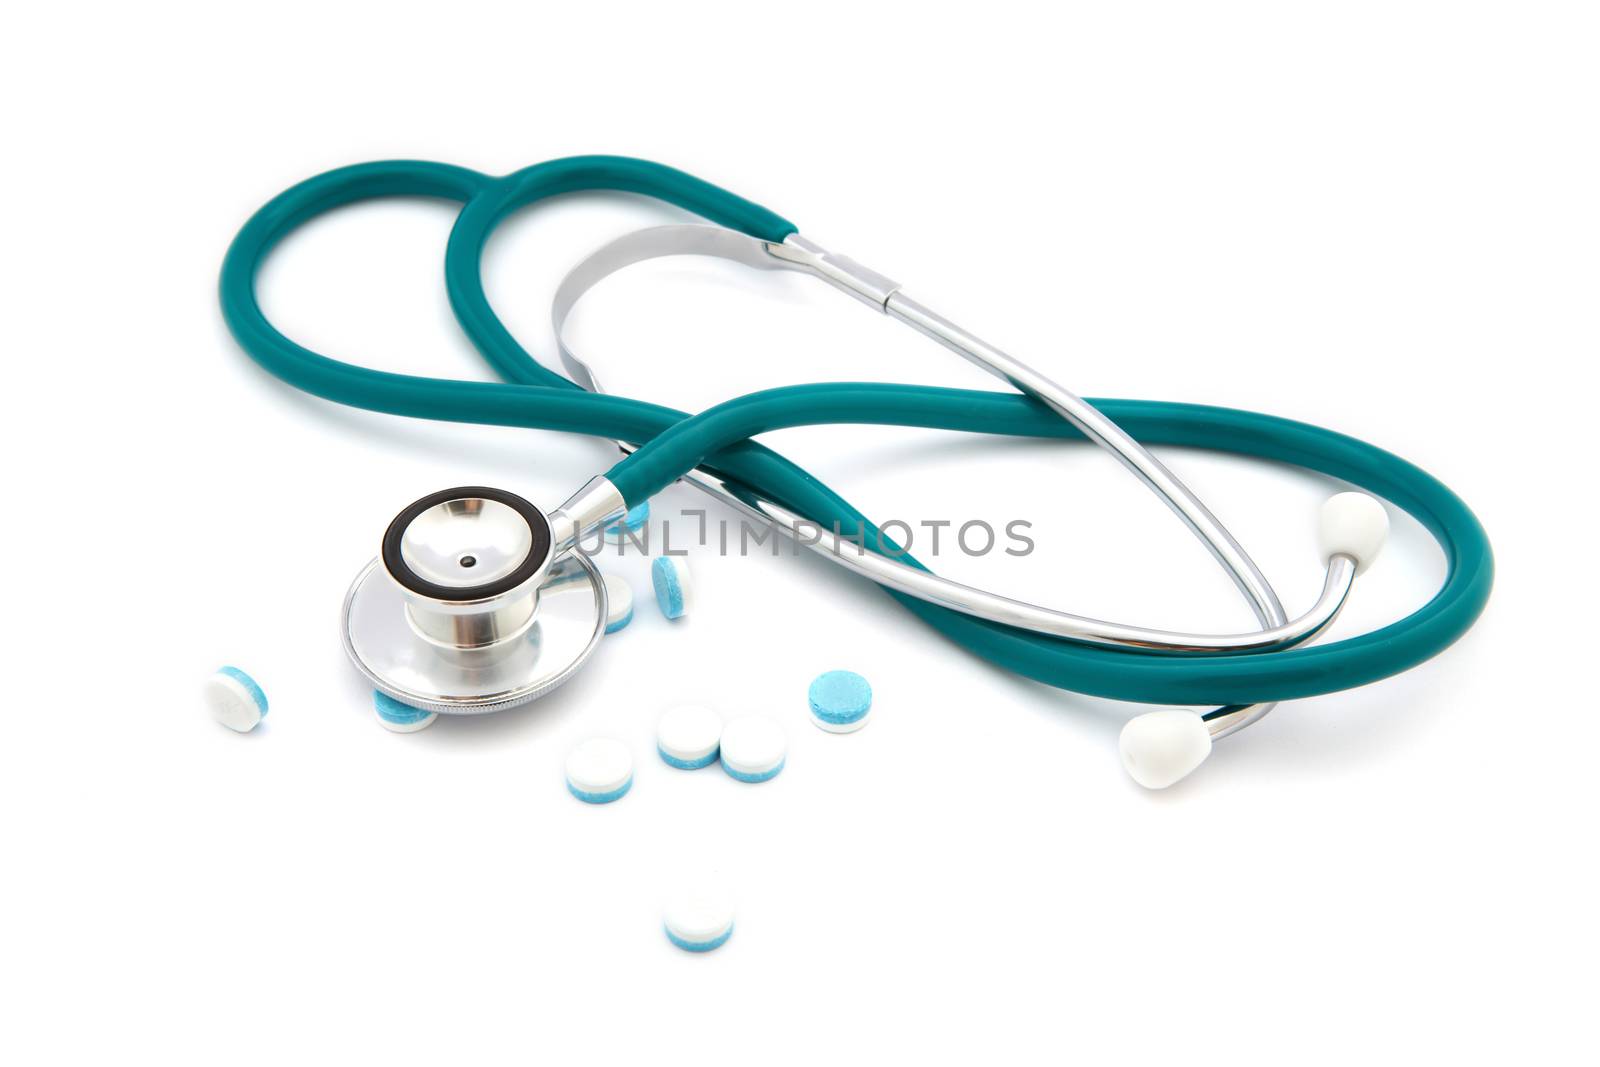 Pills and stethoscope by rufous